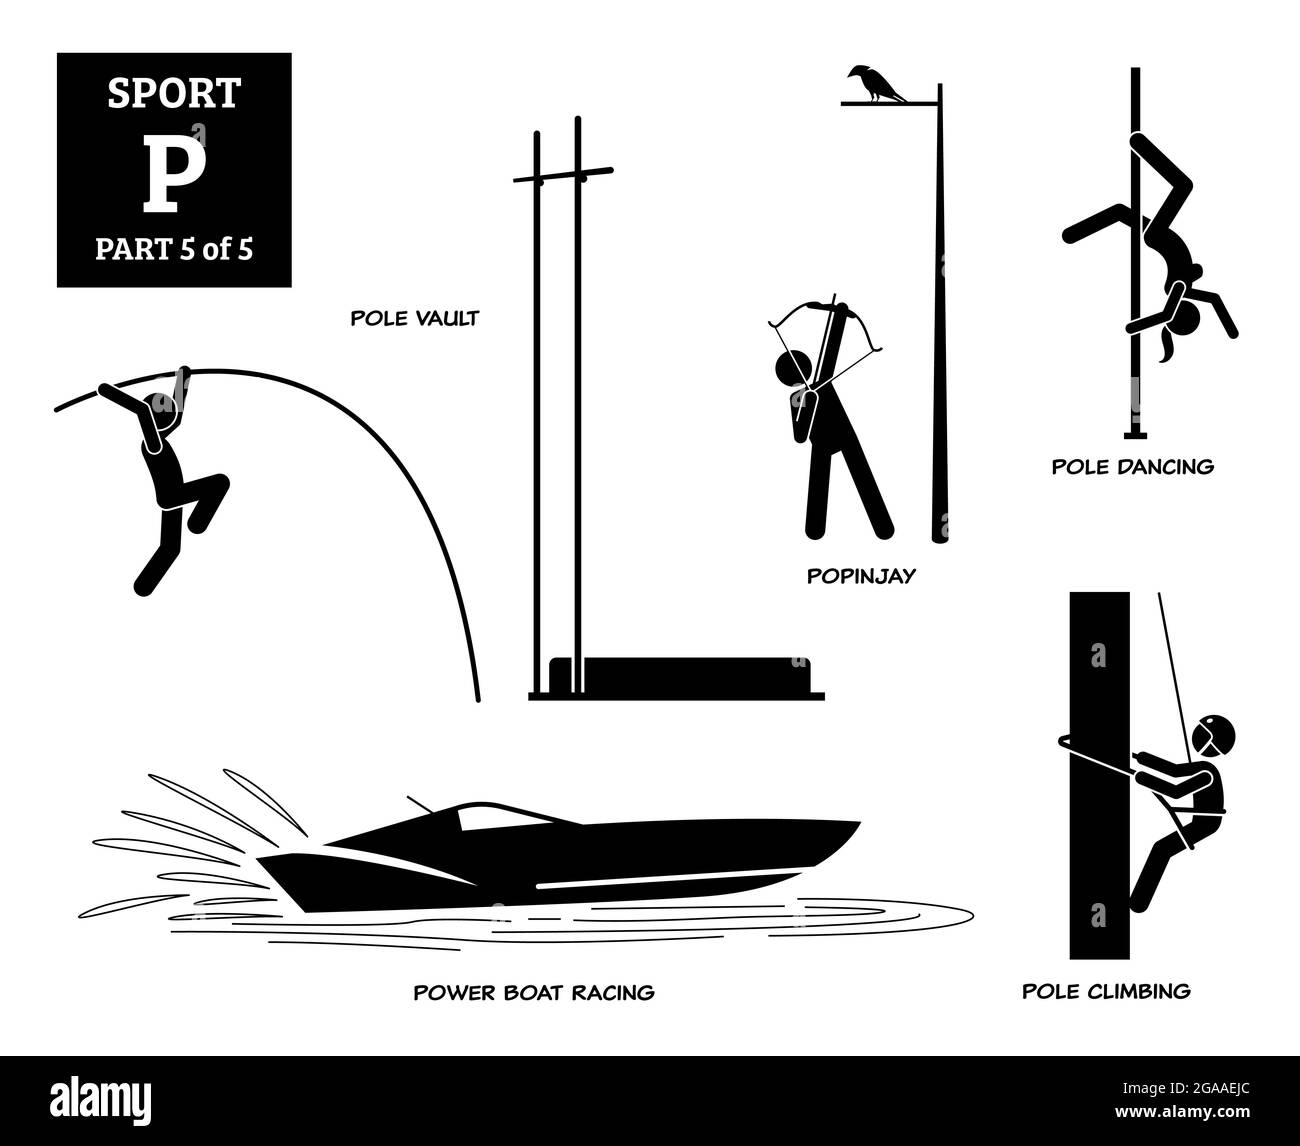 Sport games alphabet P vector icons pictogram. Pole vault, popinjay, pole dancing, power boat racing, and pole climbing. Stock Vector